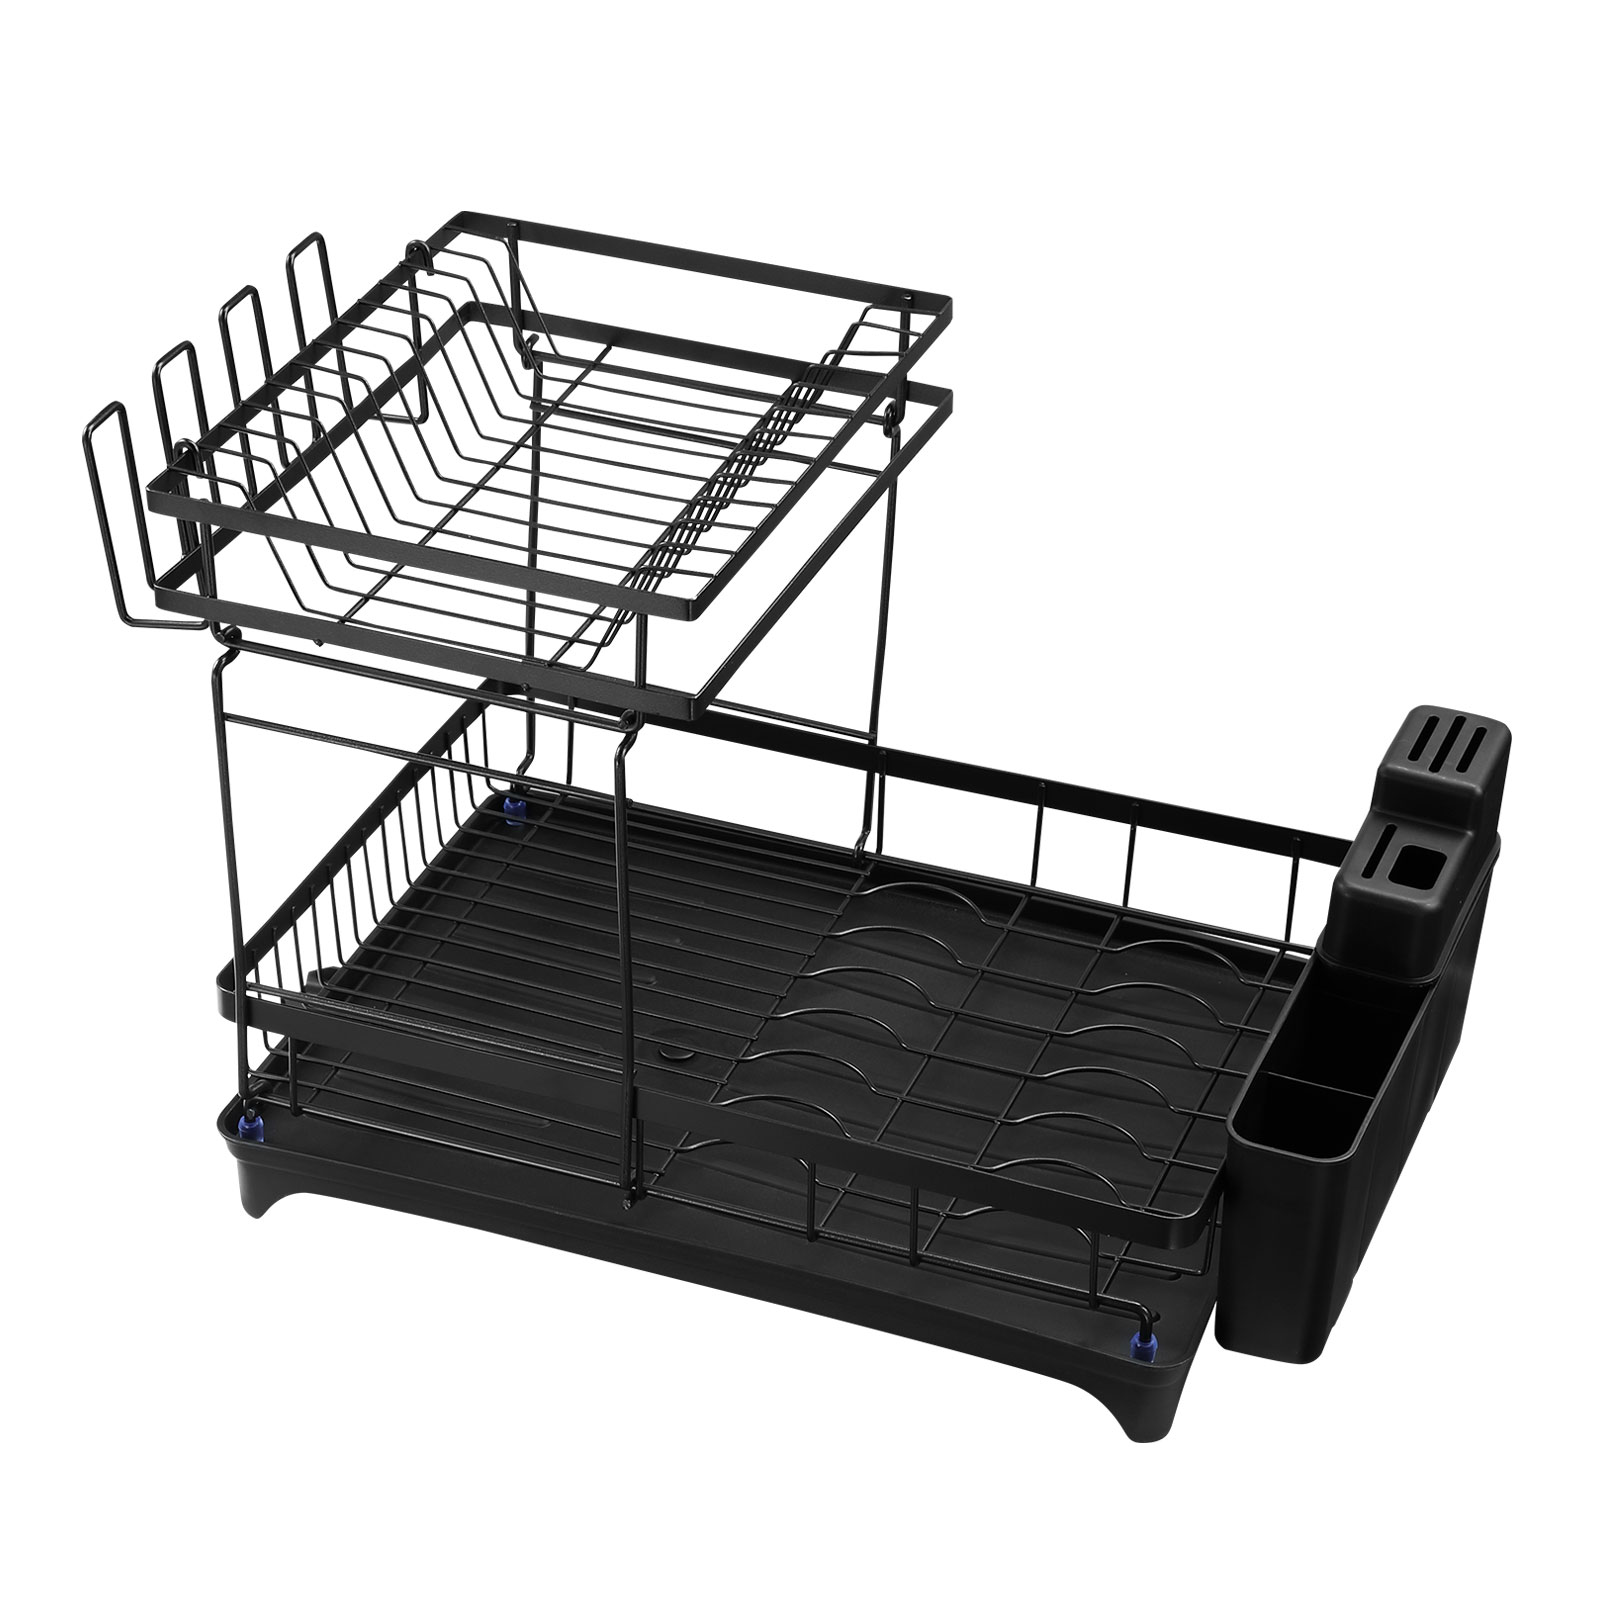 Two-Tier Dish Drying Rack with Drainage